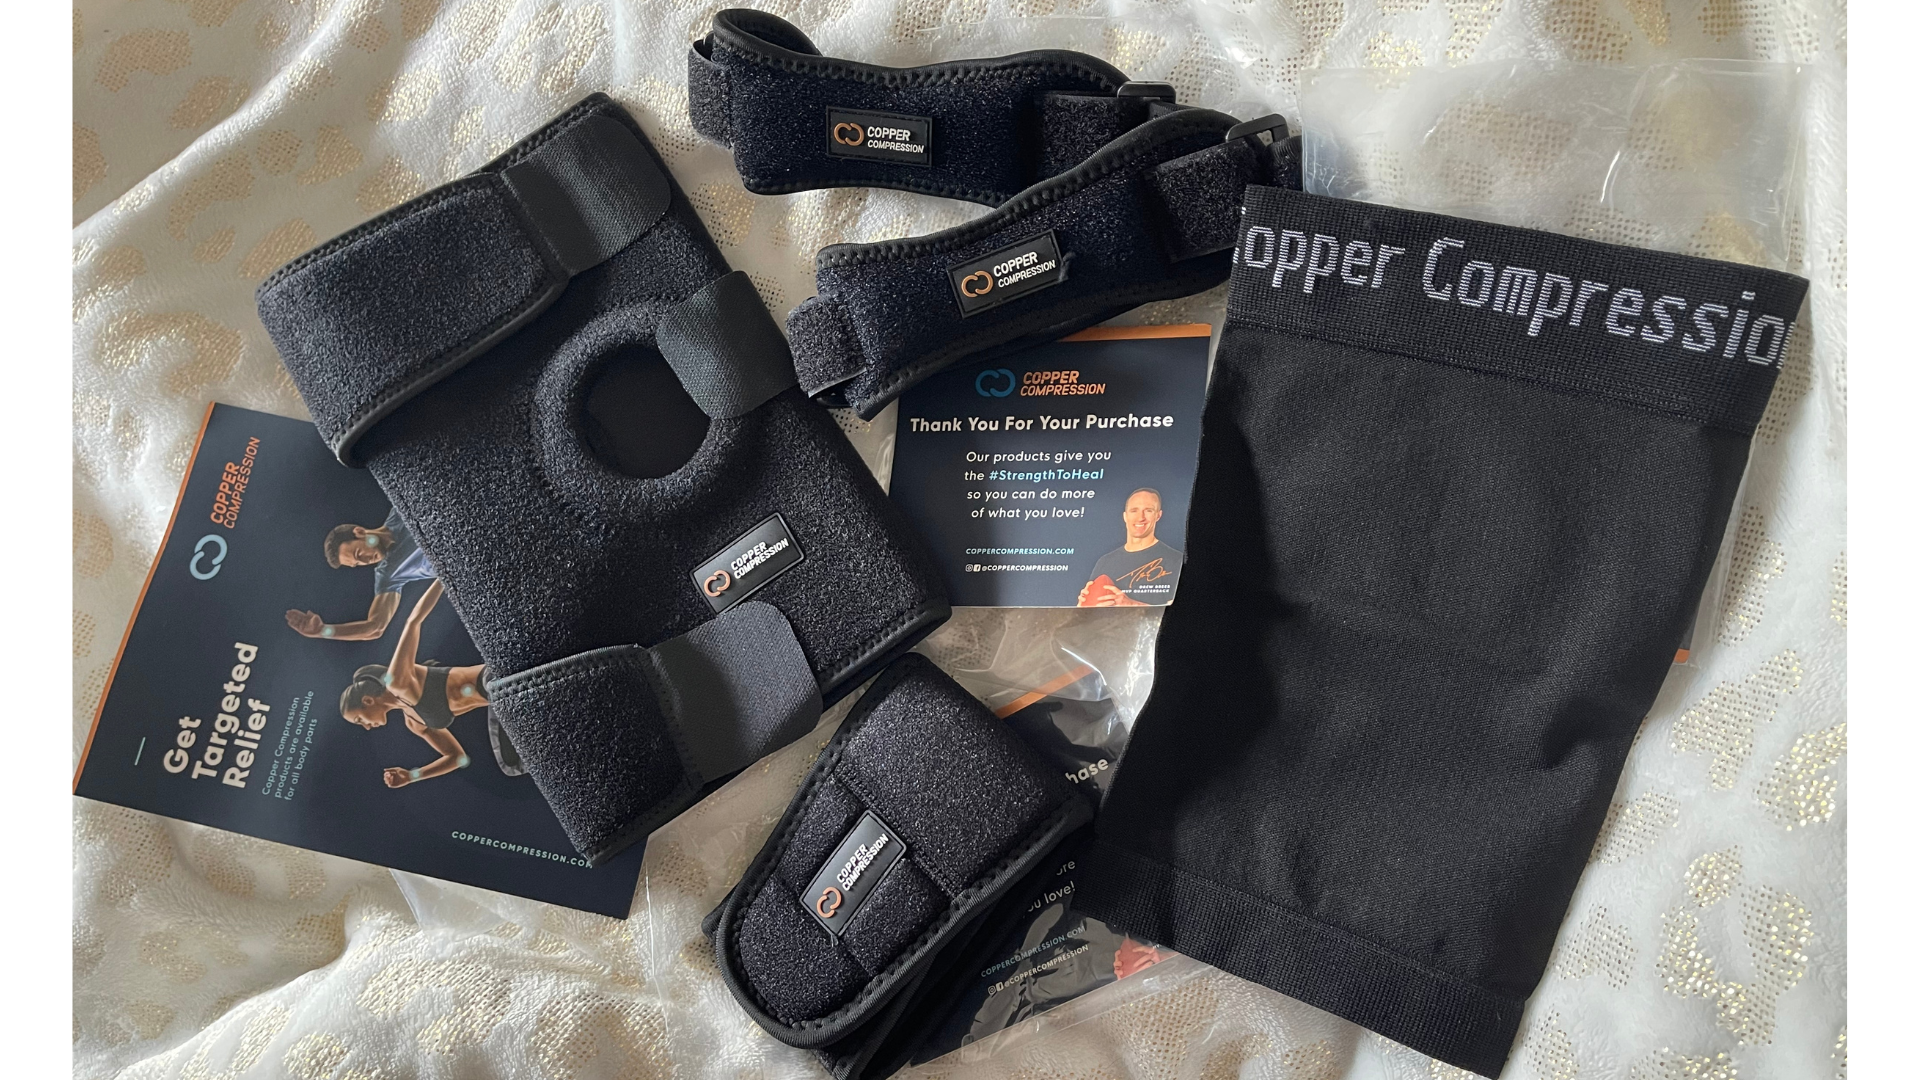 5 Ways that Copper Compression's compression garments helped up my